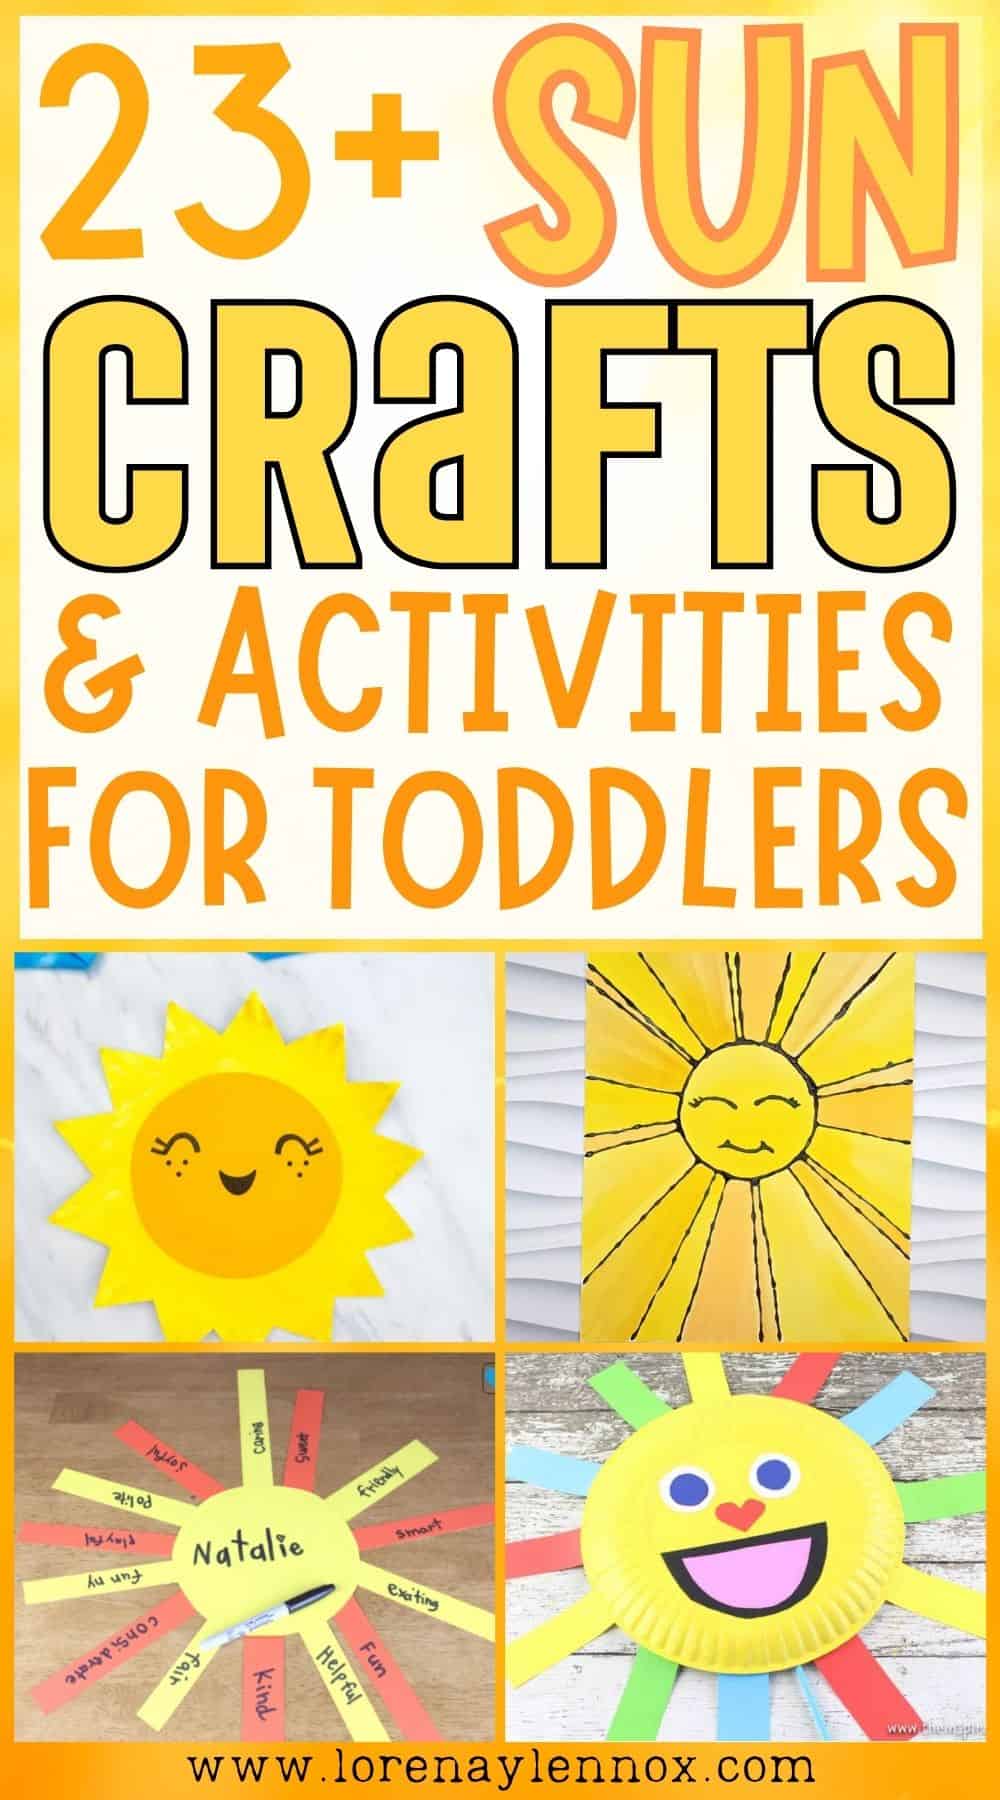 If you are looking to keep your little ones engaged and entertained this summer, why not try out one of these 23 sun activities for toddlers.